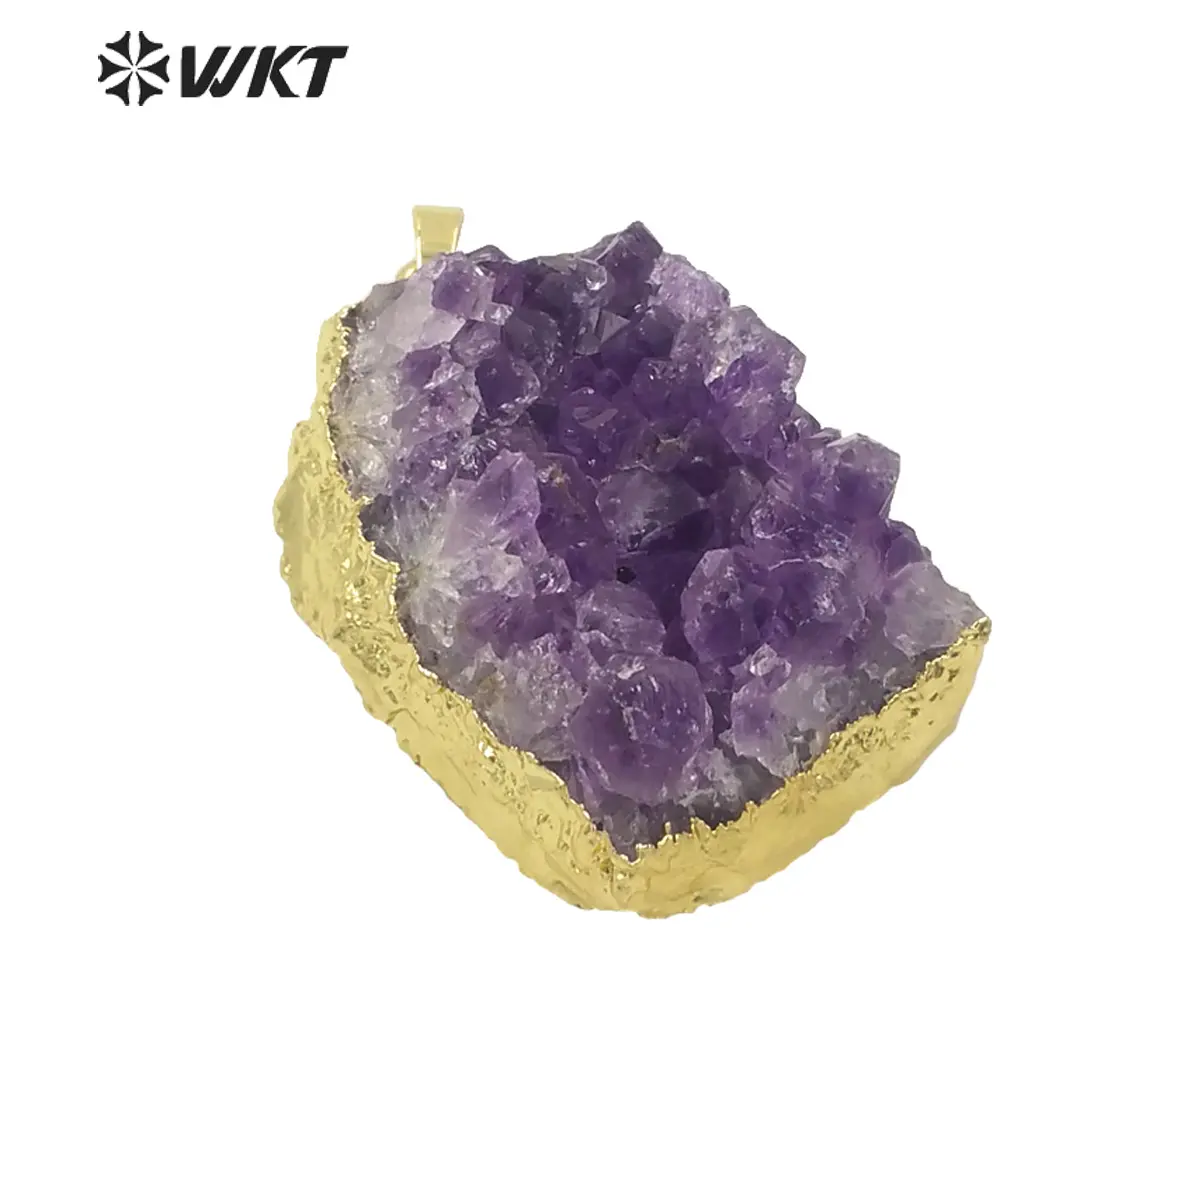 WT-P1438 Raw Quartz With Gold Bezel Amethyst Pendant Jewelry For Women Necklace Making Natural Uraguay Purple Crystal Pendant